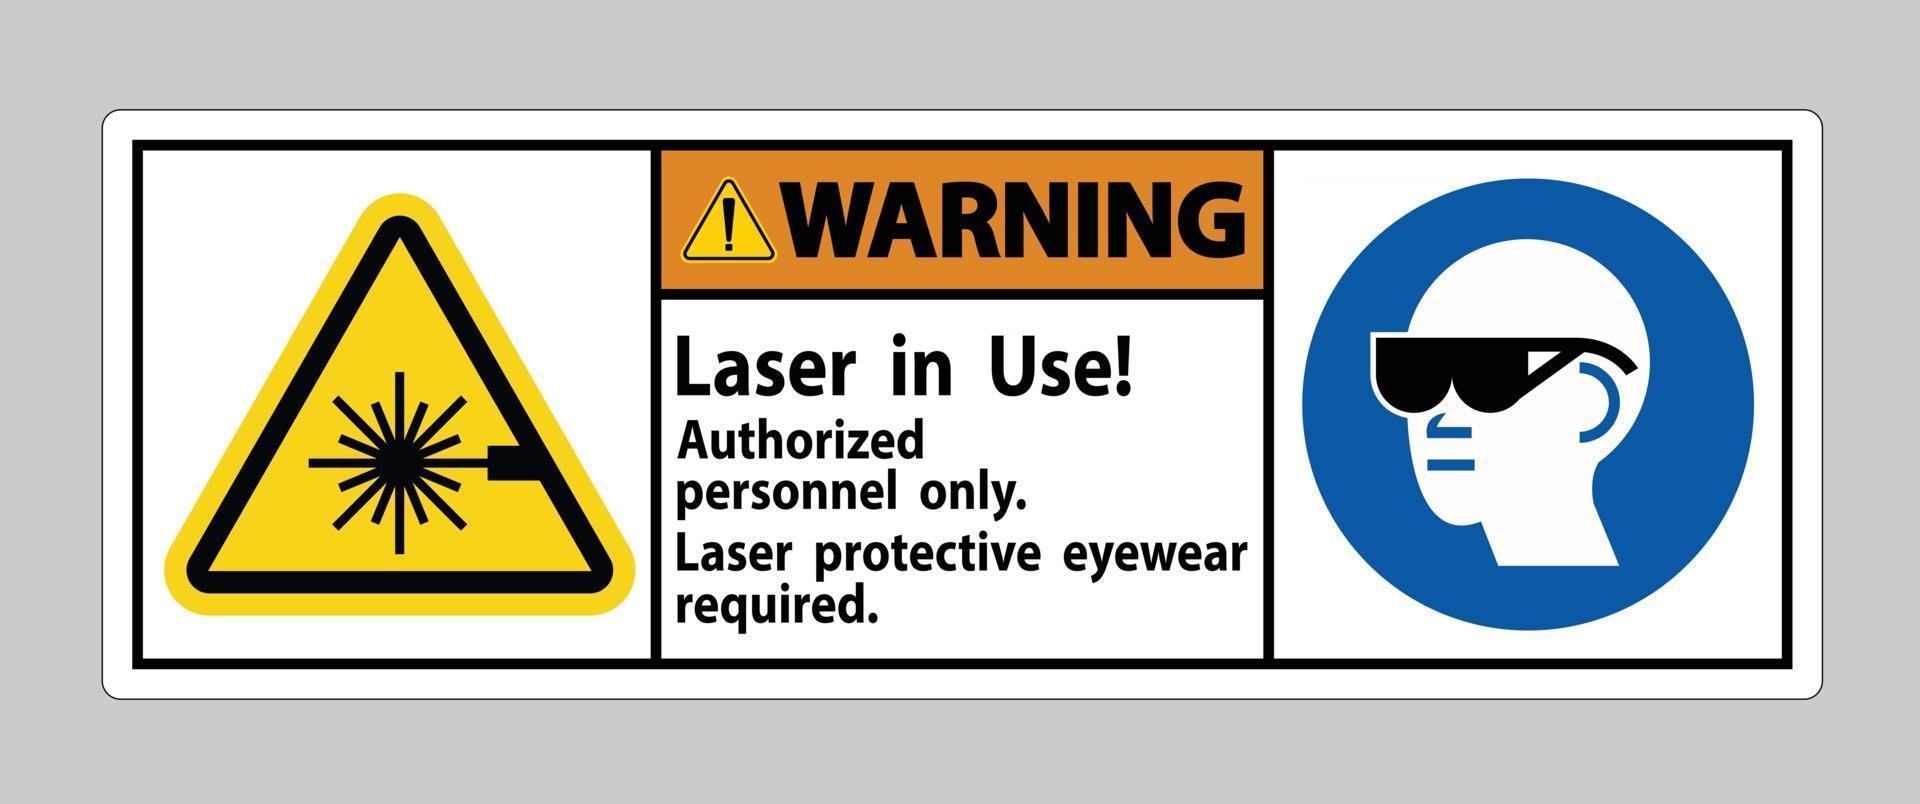 Warning Sign Laser In Use Authorized Personnel Only Laser Protec vector